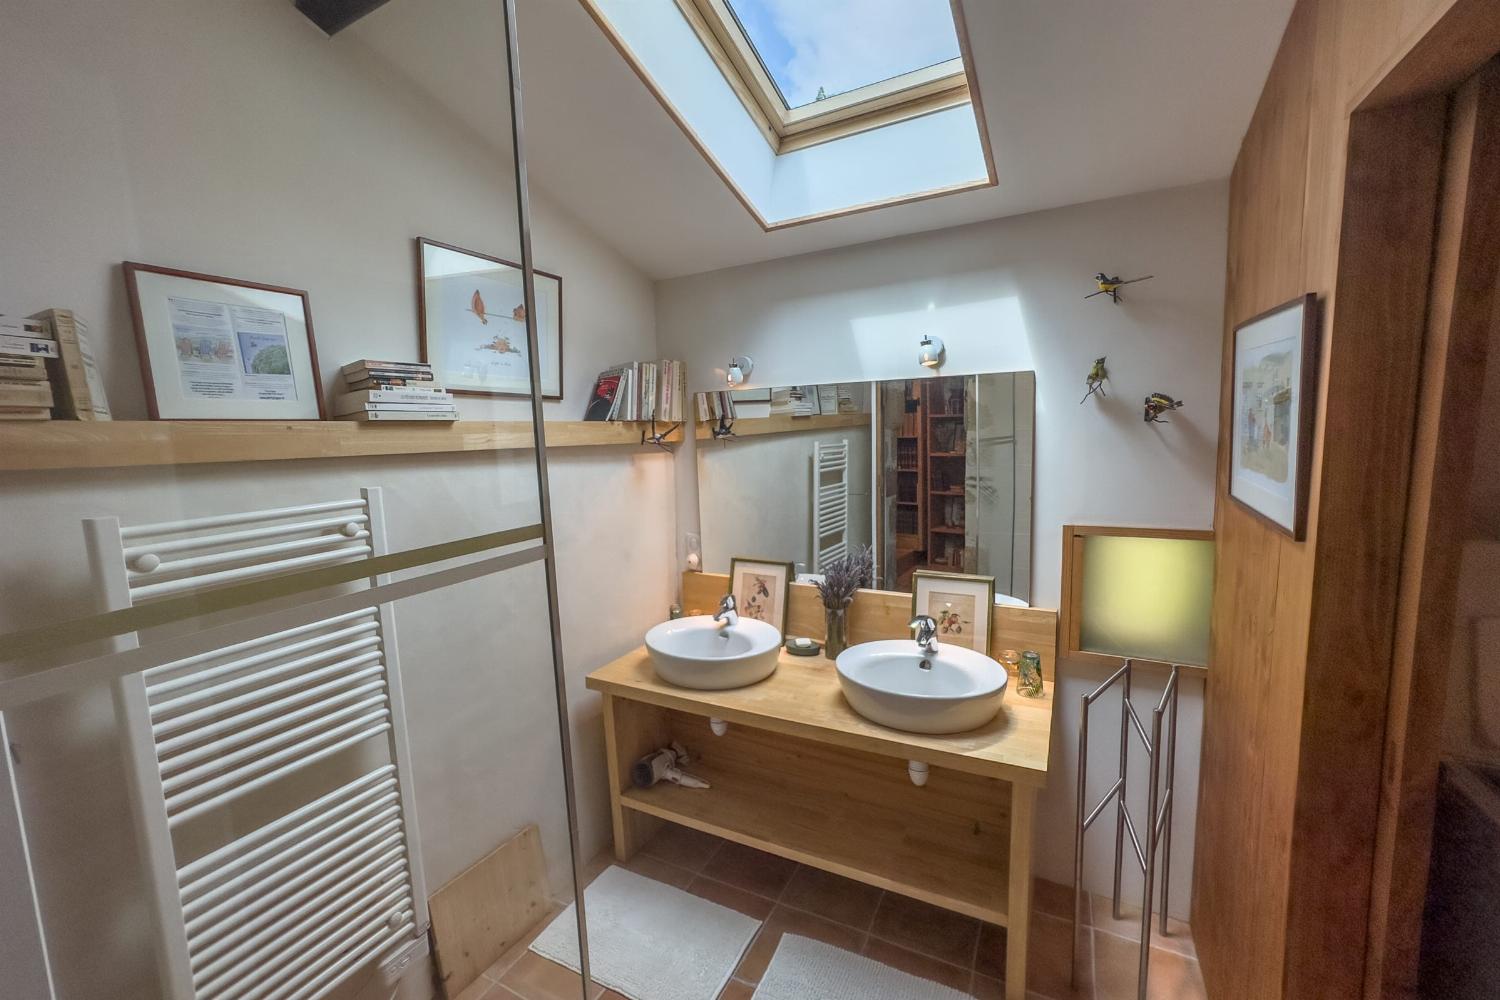 Bathroom | Holiday home in the Gers